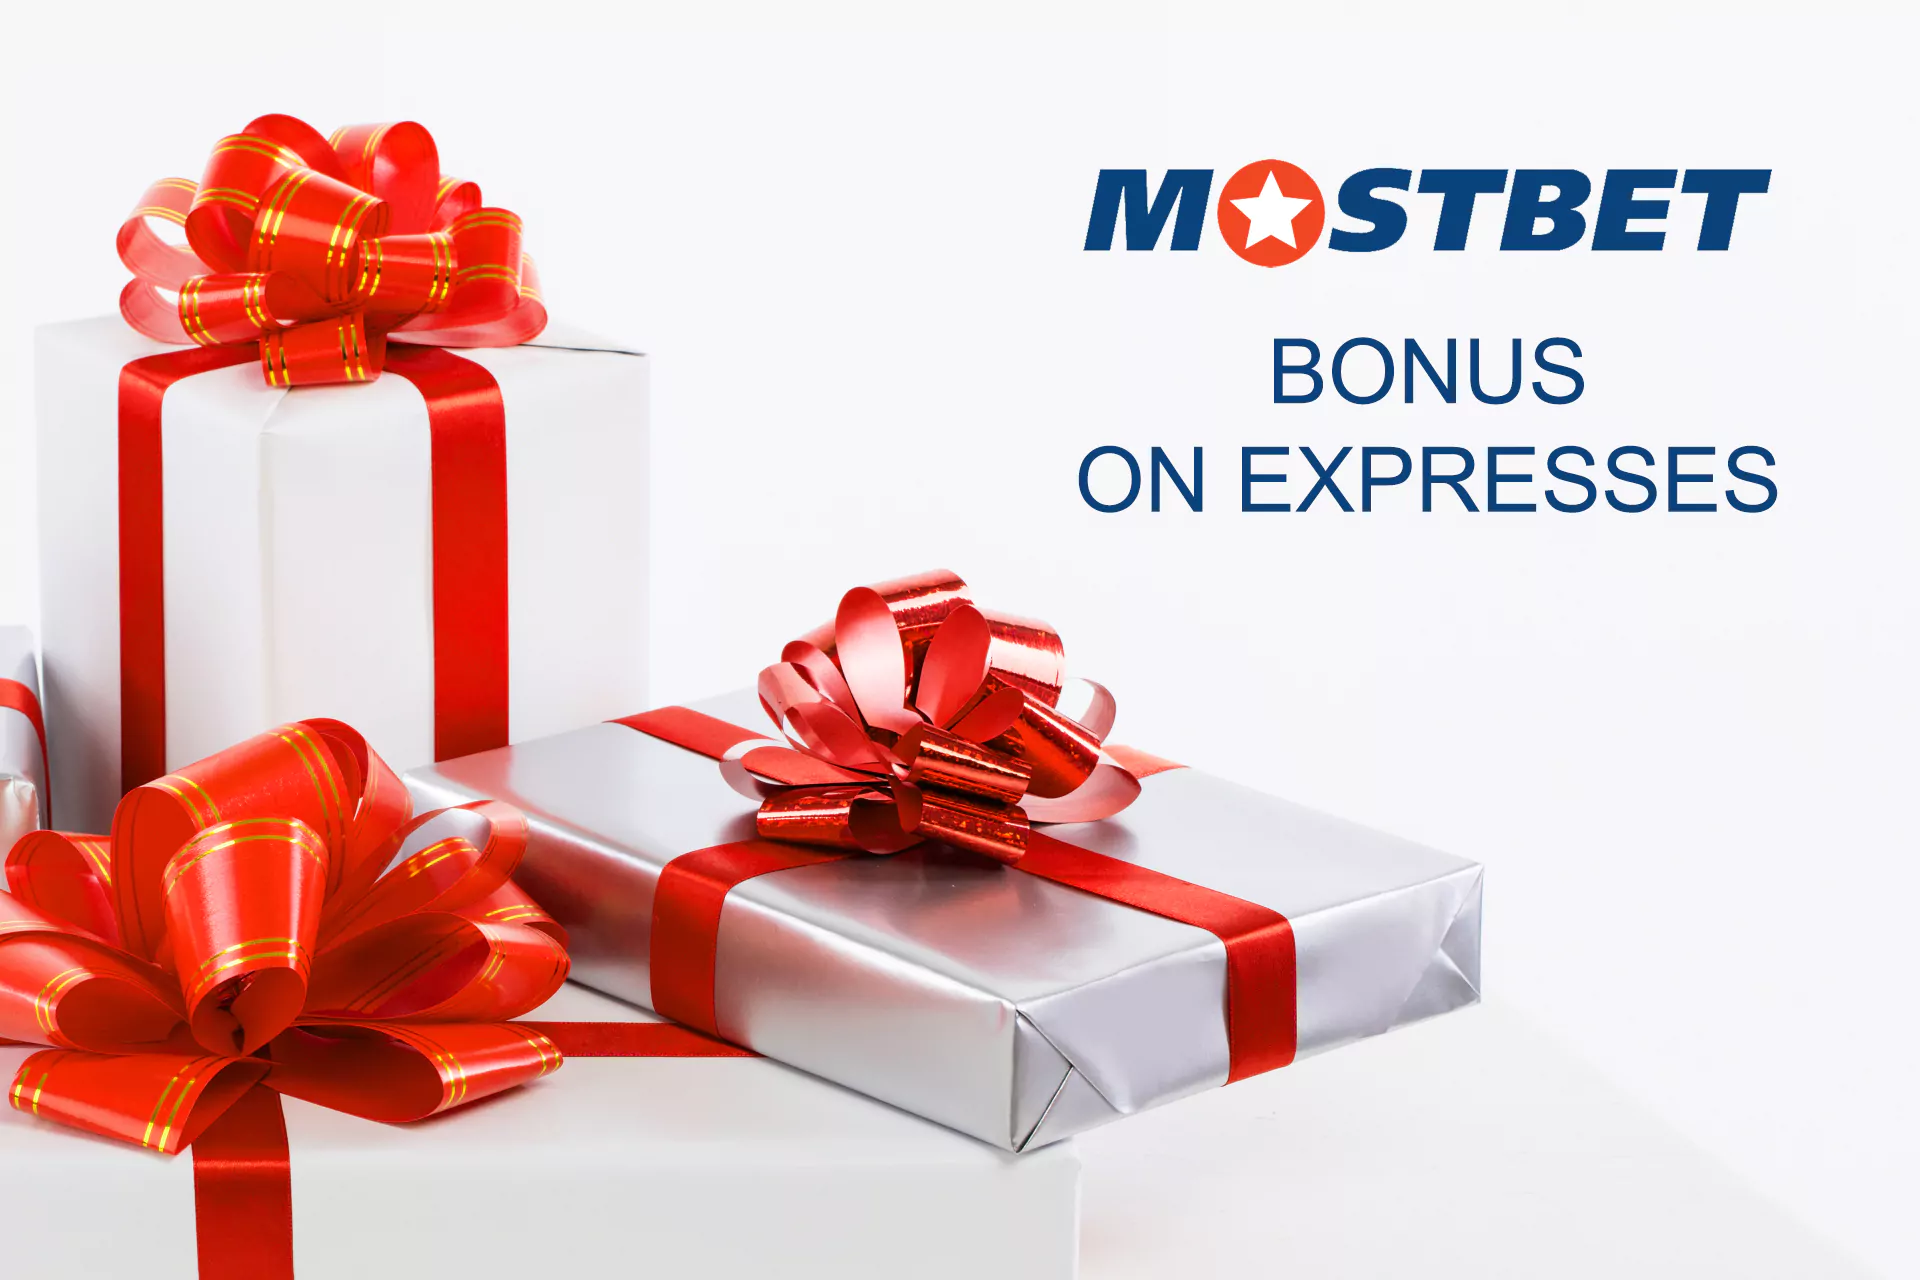 On Mostbet you can also get bonuses on expresses.